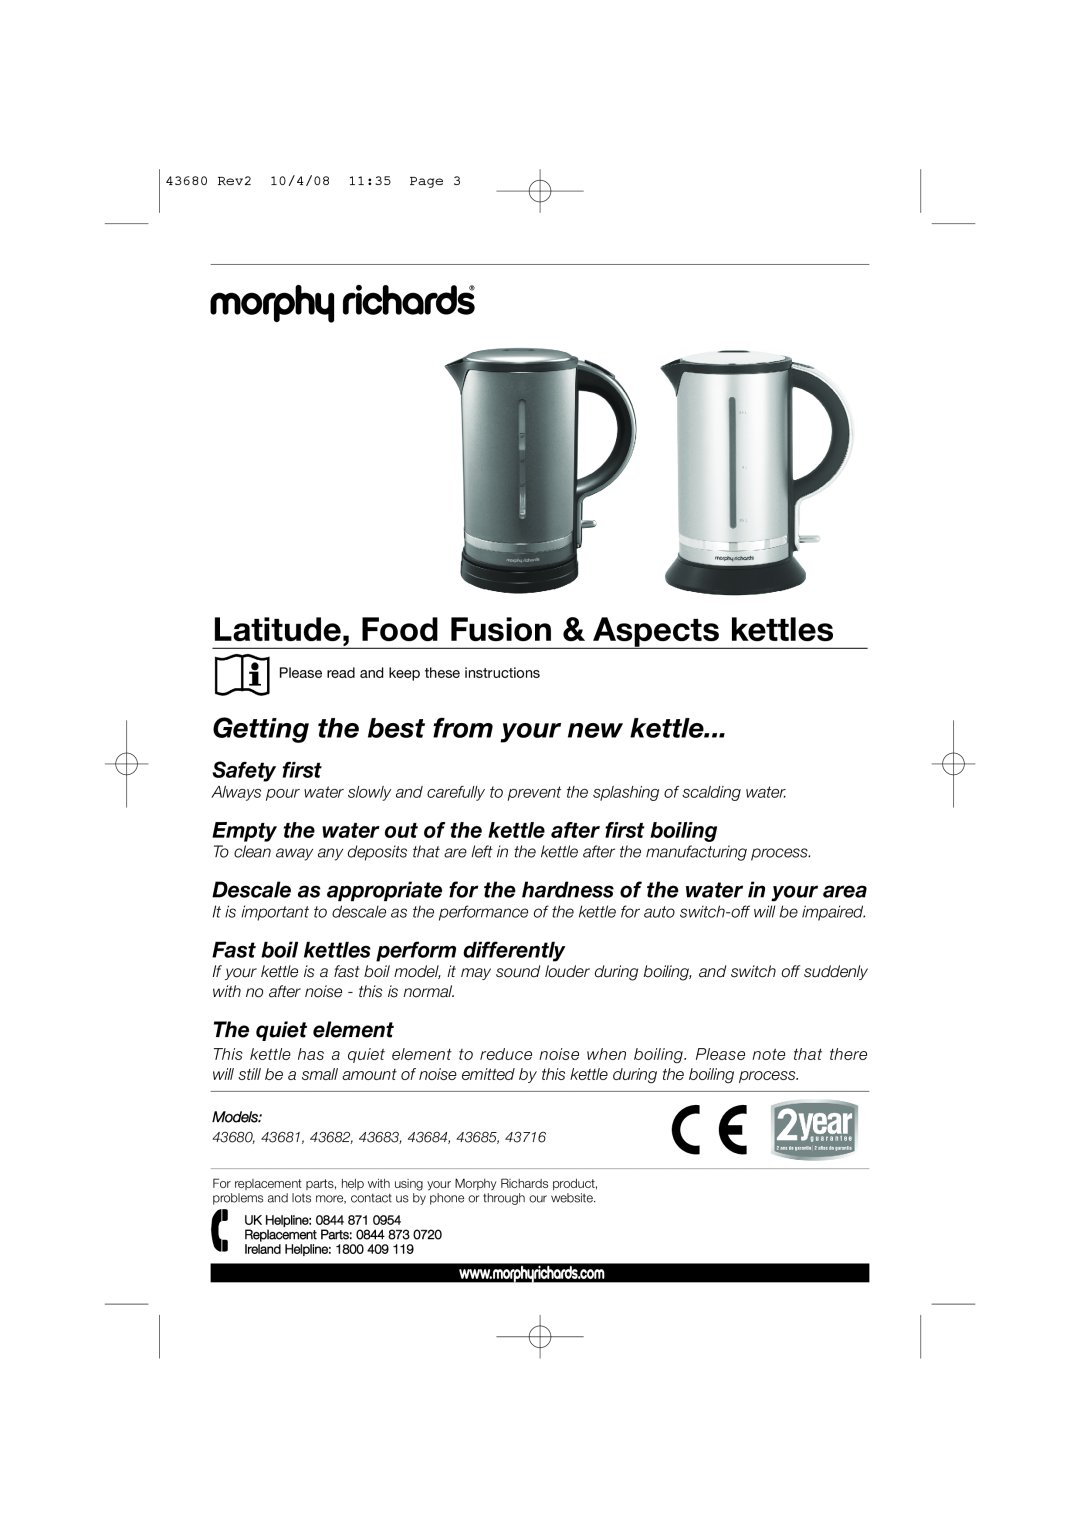 Morphy Richards 43680 warranty Latitude, Food Fusion & Aspects kettles, Getting the best from your new kettle, Safety first 